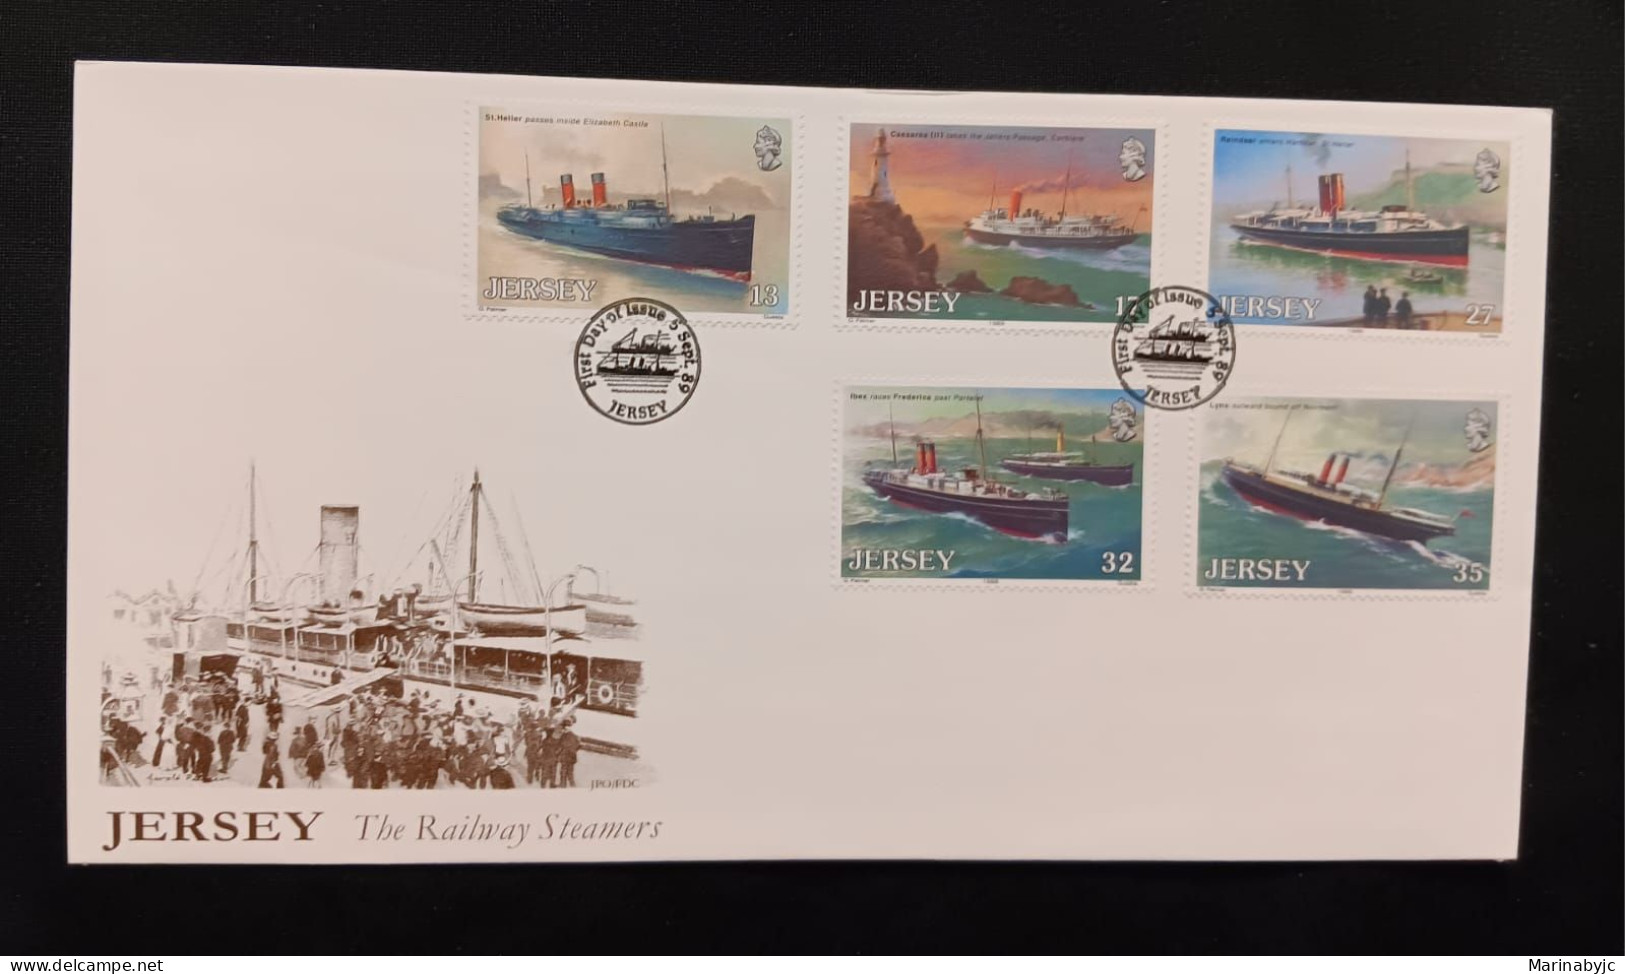 DM)1989, JERSEY, FIRST DAY COVER, ISSUE, SHIPS, SAINT HÉLIER, CAESSAREA II AND FARO DE CORBIÈRE, REINDEER, IBEX AND FRED - Jersey